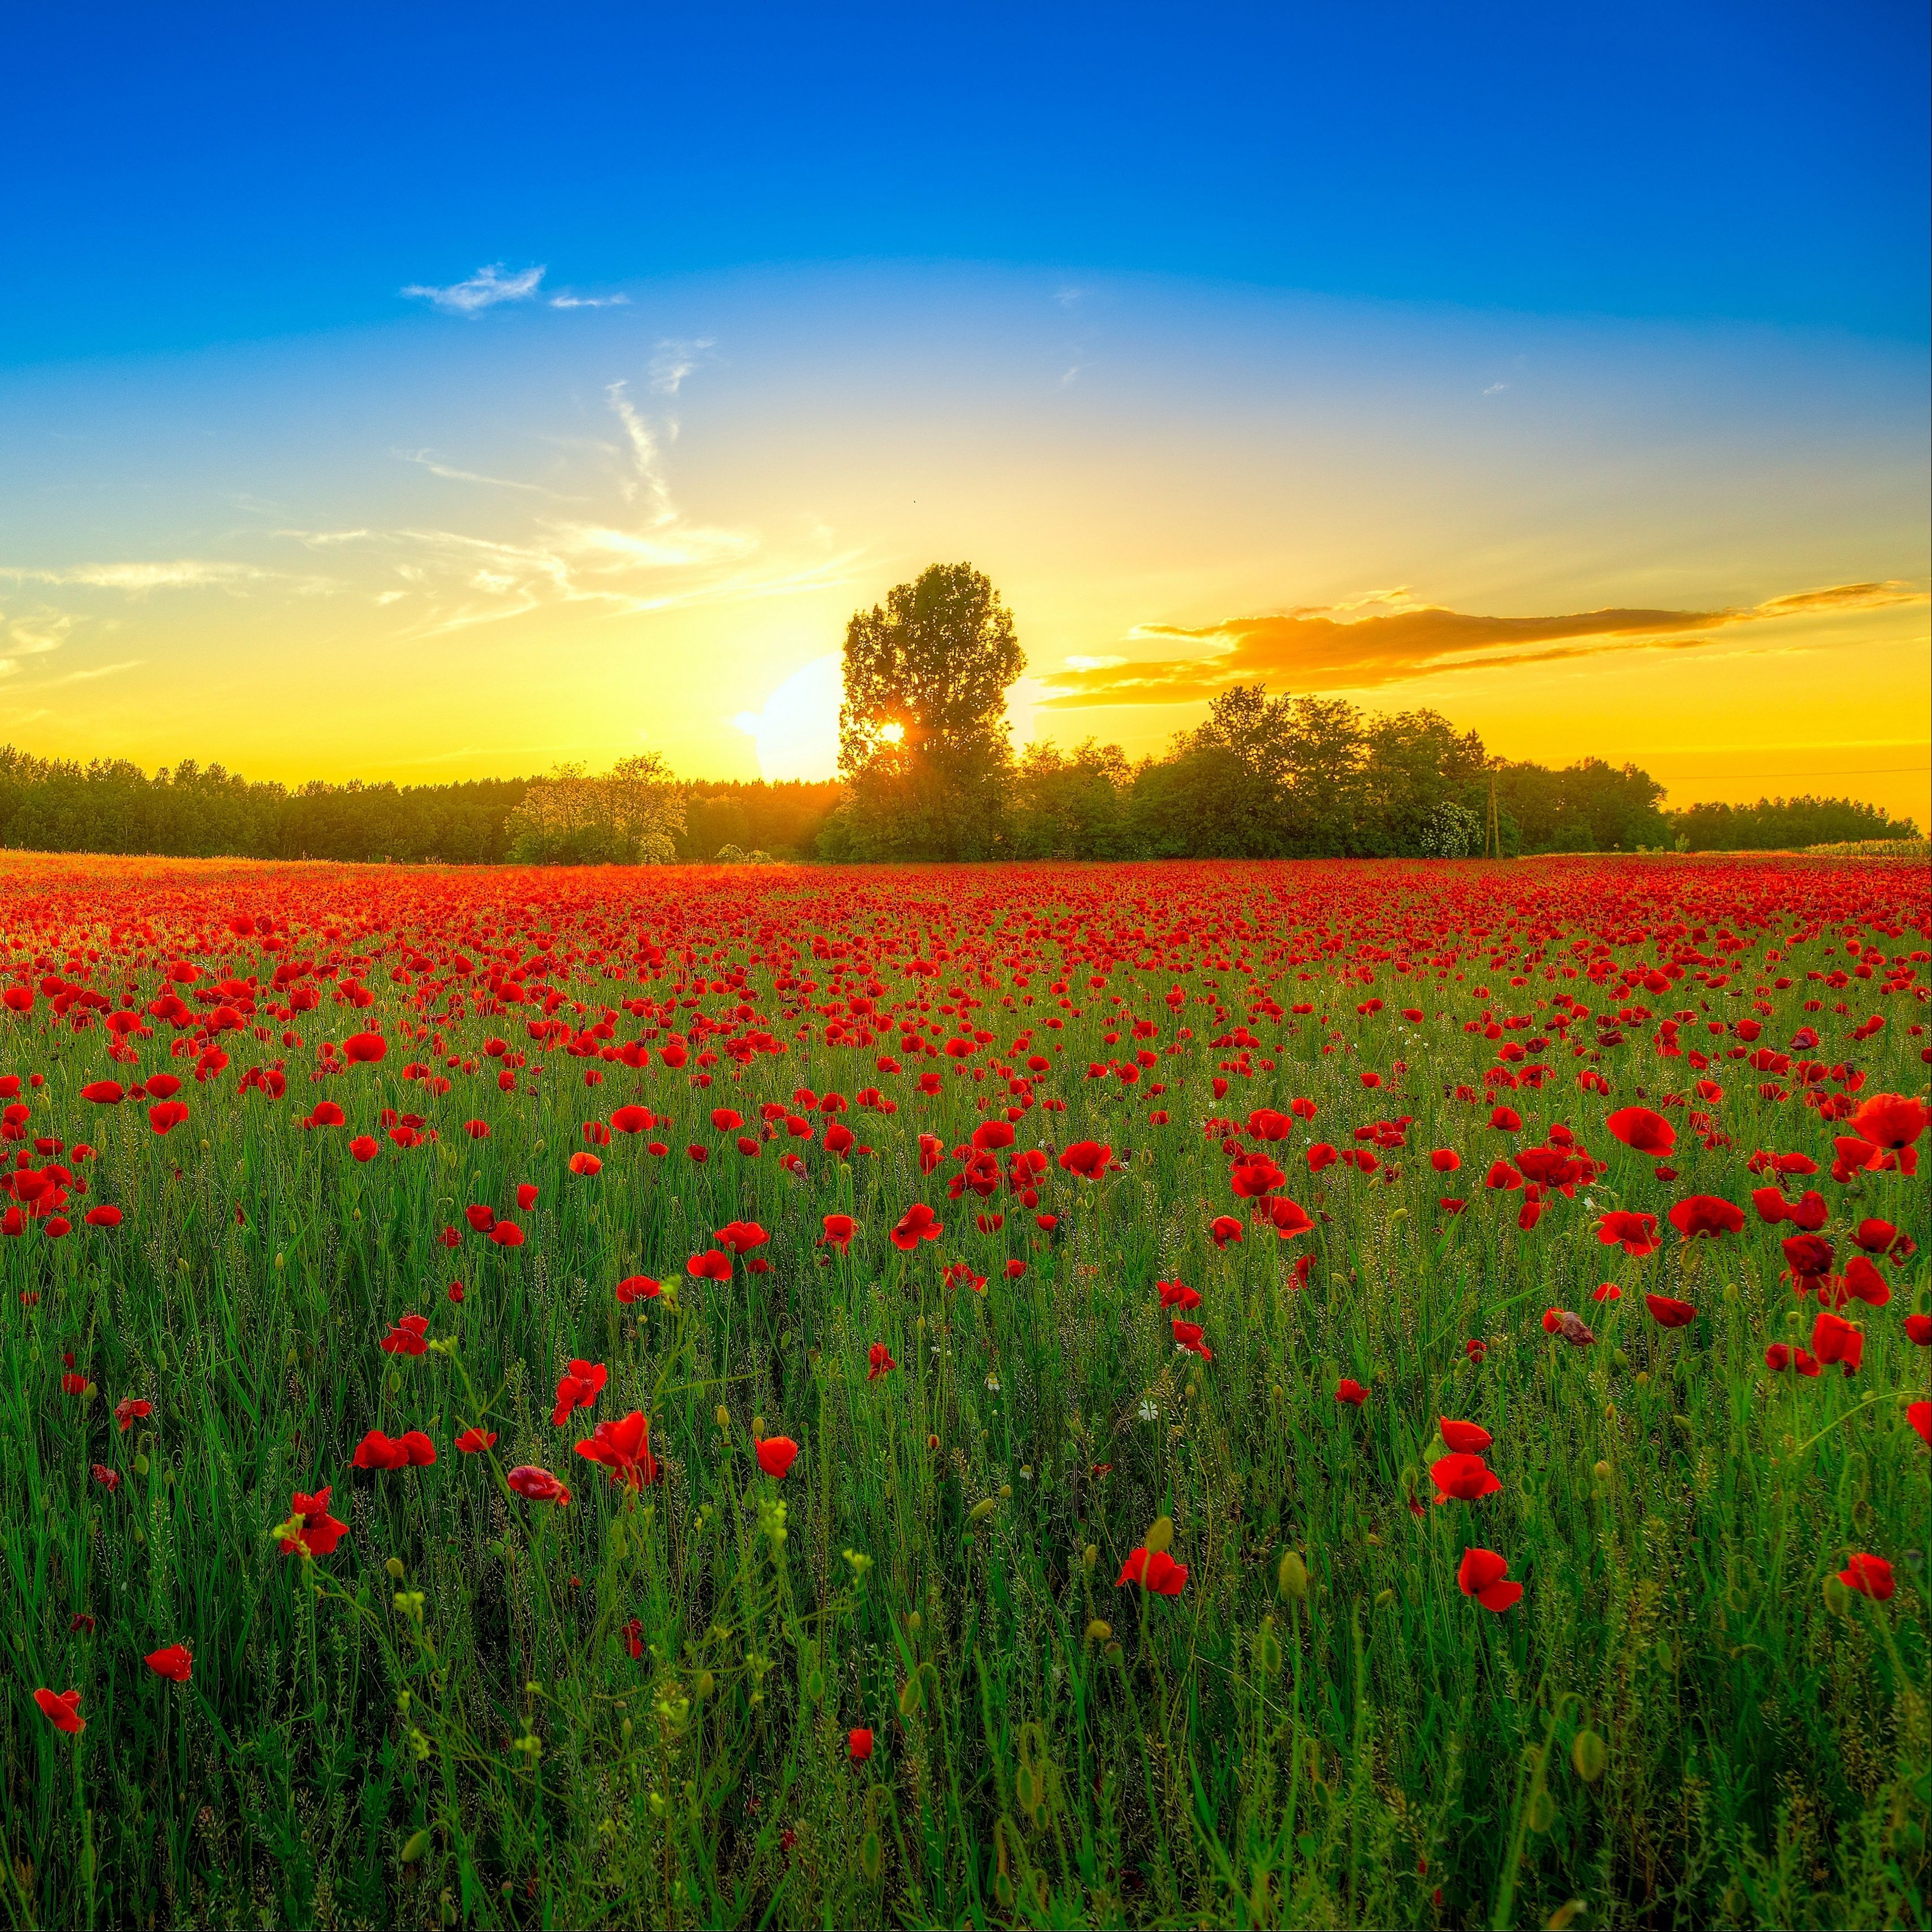 Download wallpaper 3415x3415 poppies, field, bloom, sunset, clouds ipad pro 12.9 retina for parallax HD background